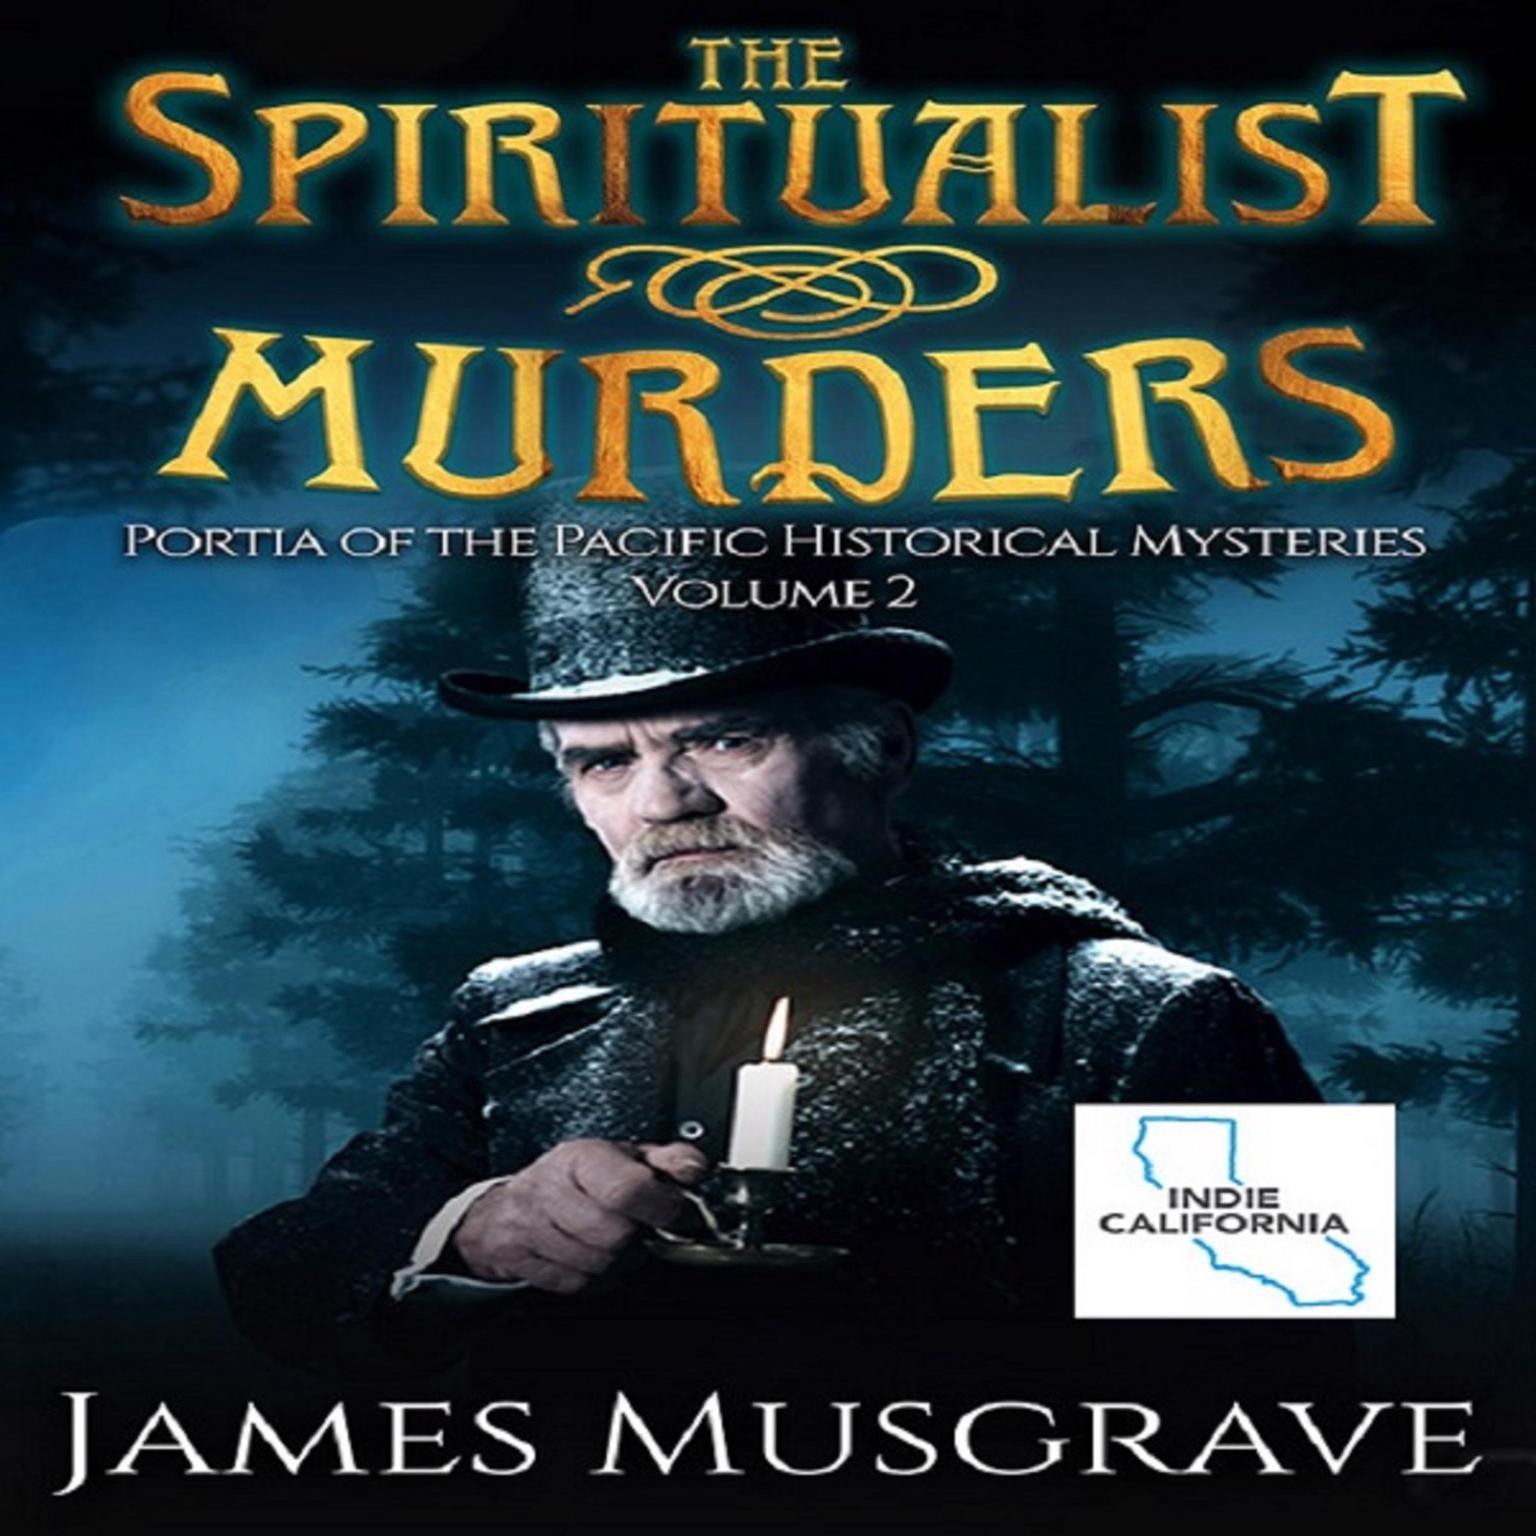 The Spiritualist Murders: Portia of the Pacific Historical Myteries, Volume 2 Audiobook, by James Musgrave